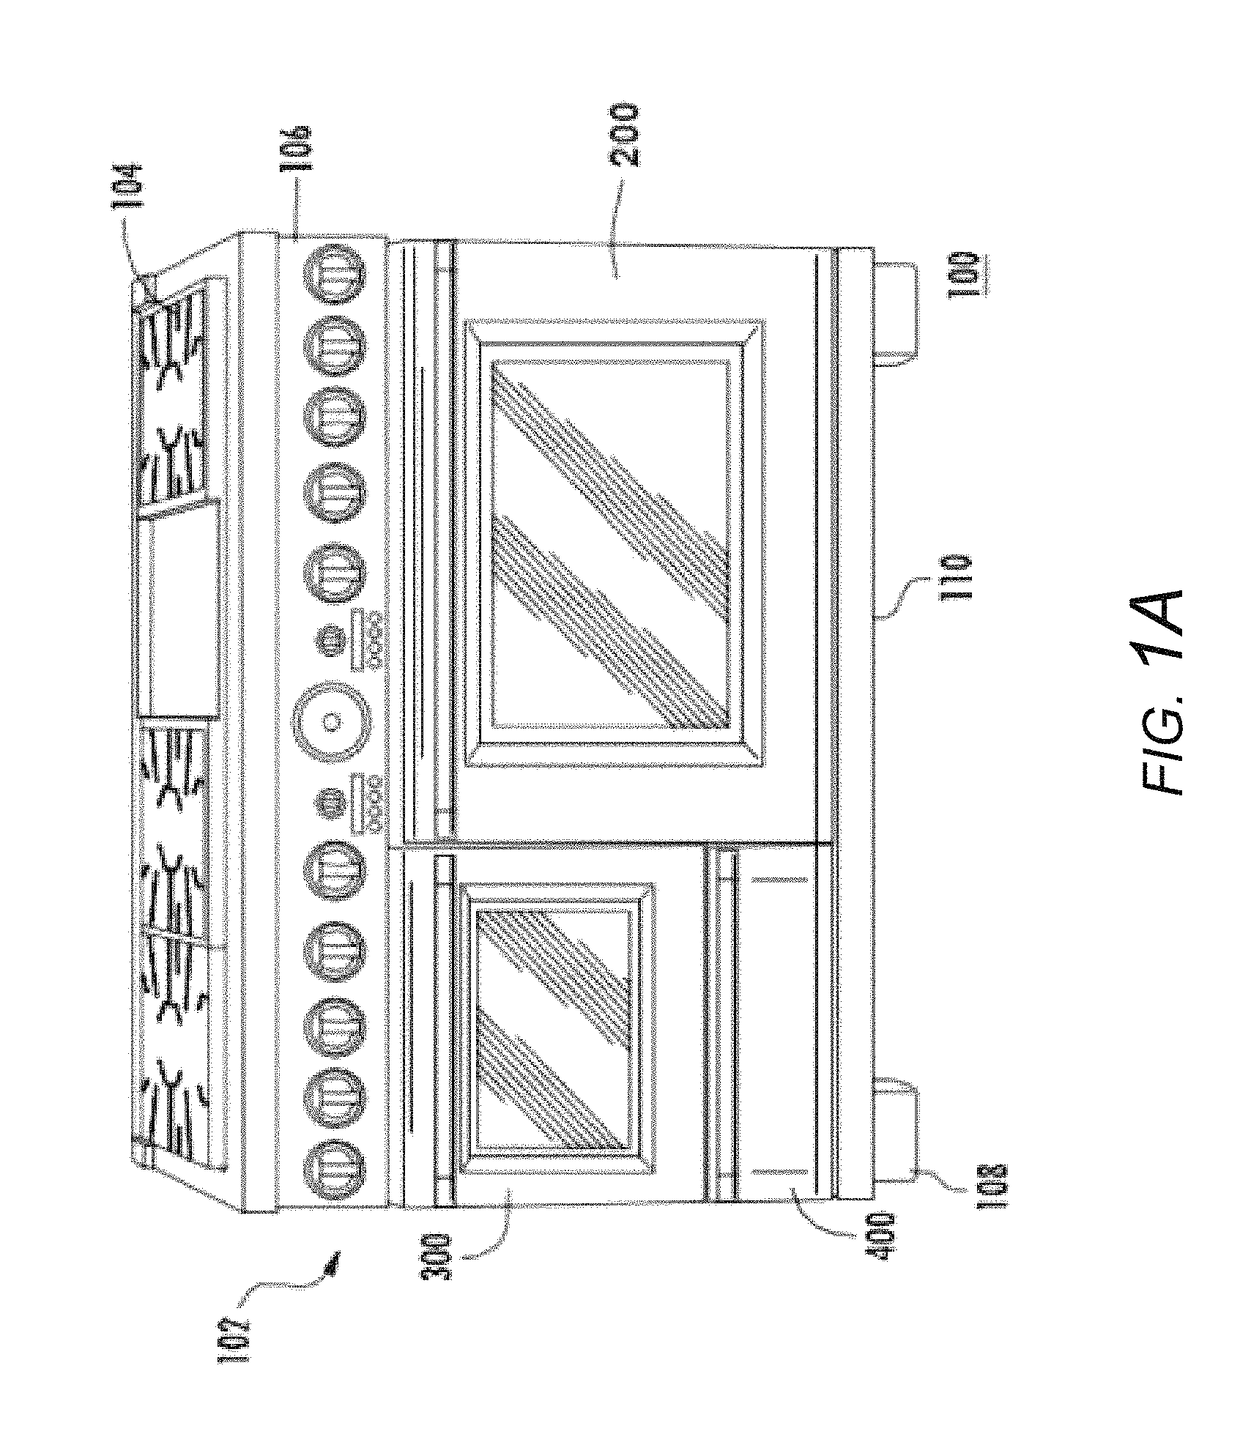 Self-cleaning household appliance having a range door with a full glass inner surface